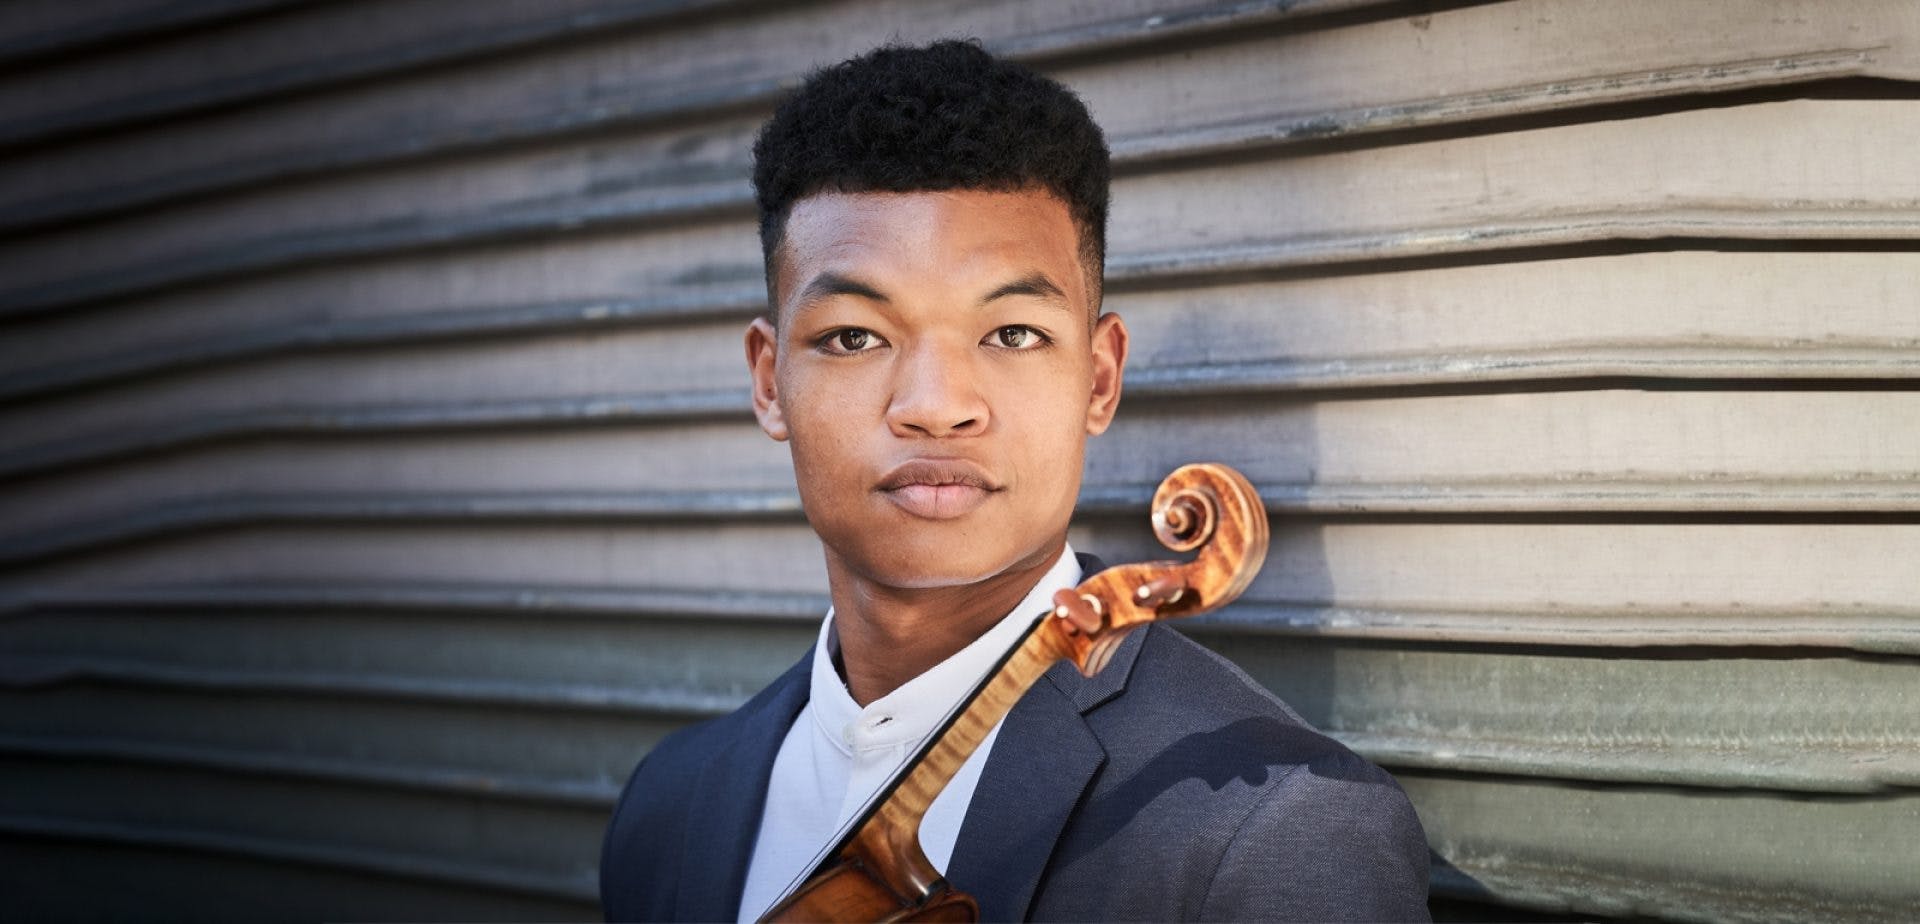 Randall Goosby plays Florence Price's Violin Concerto No. 2